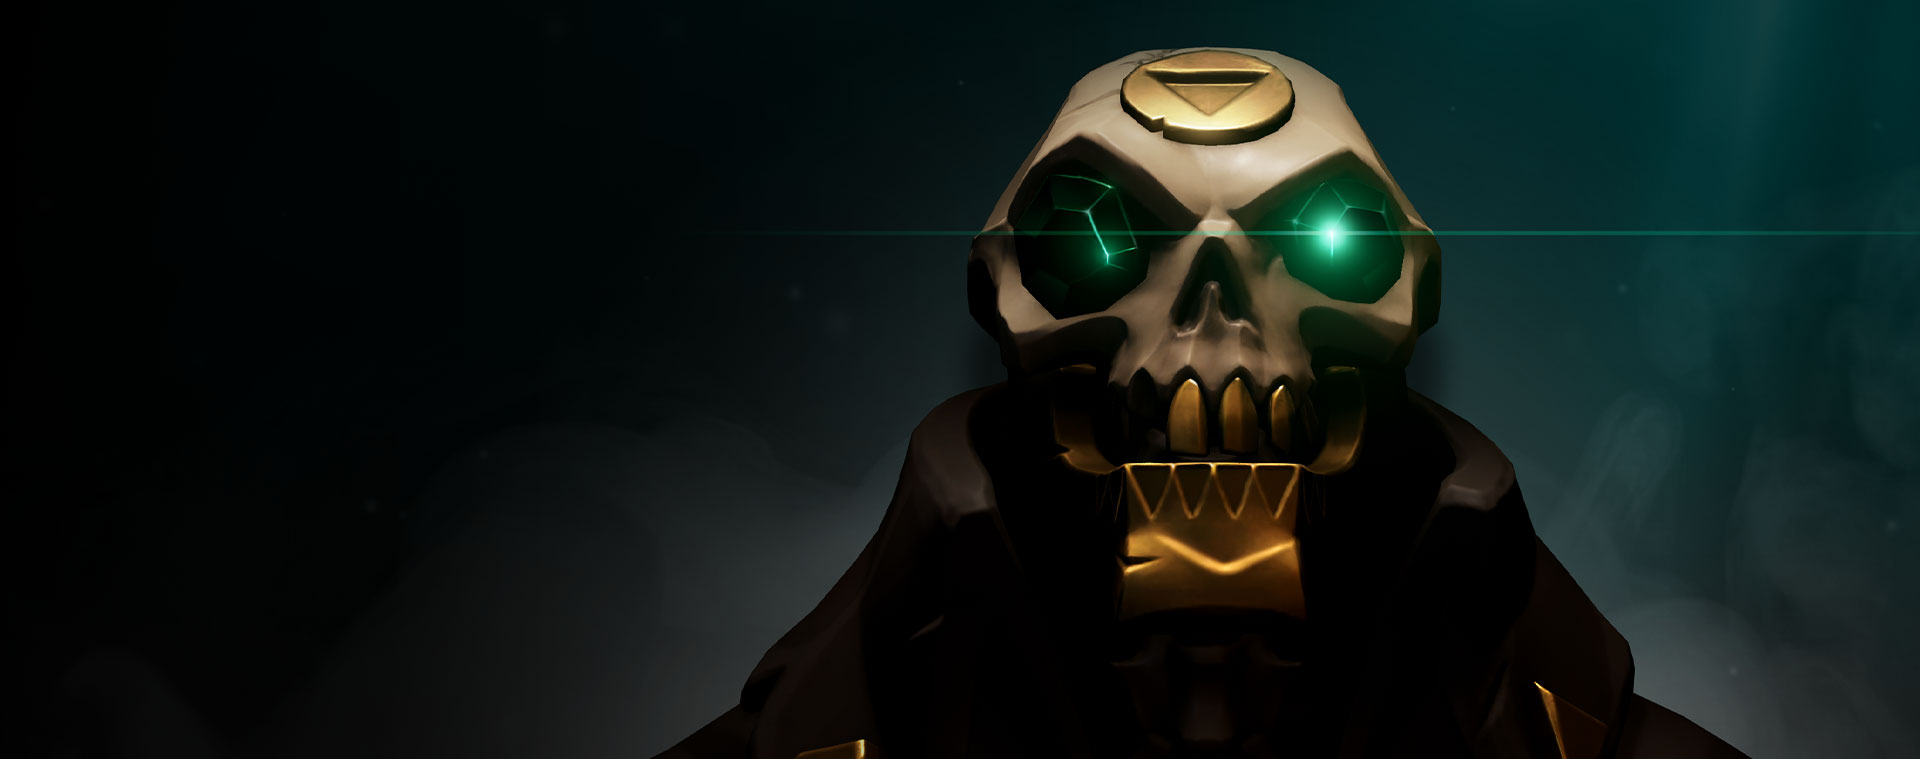 Skull from Sea of Thieves with green gems as eyes